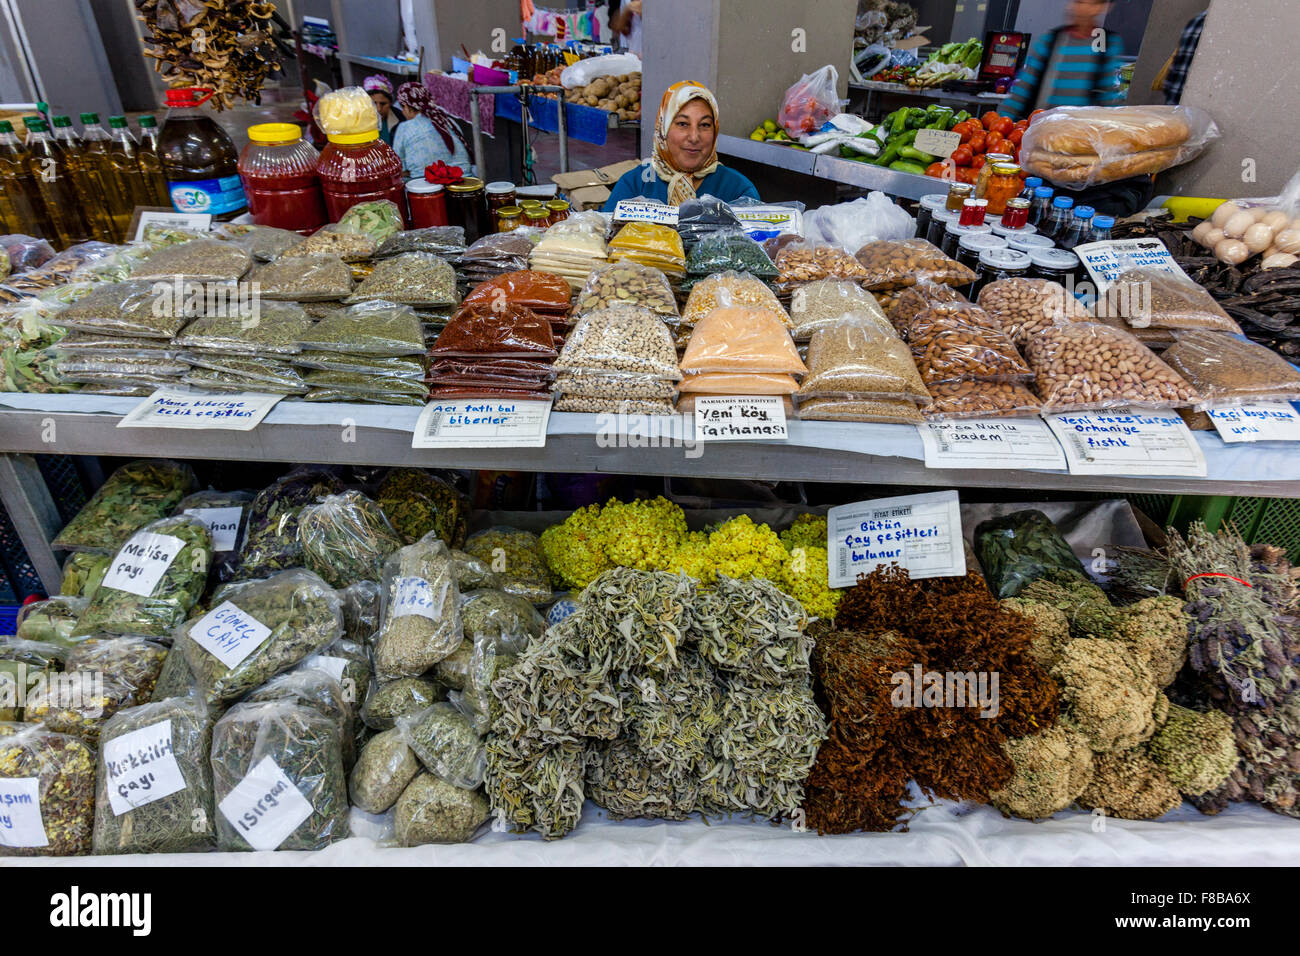 Dried Pulses, Herbs and Spices For Sale At The Market In Marmaris, Mugla Province, Turkey Stock Photo